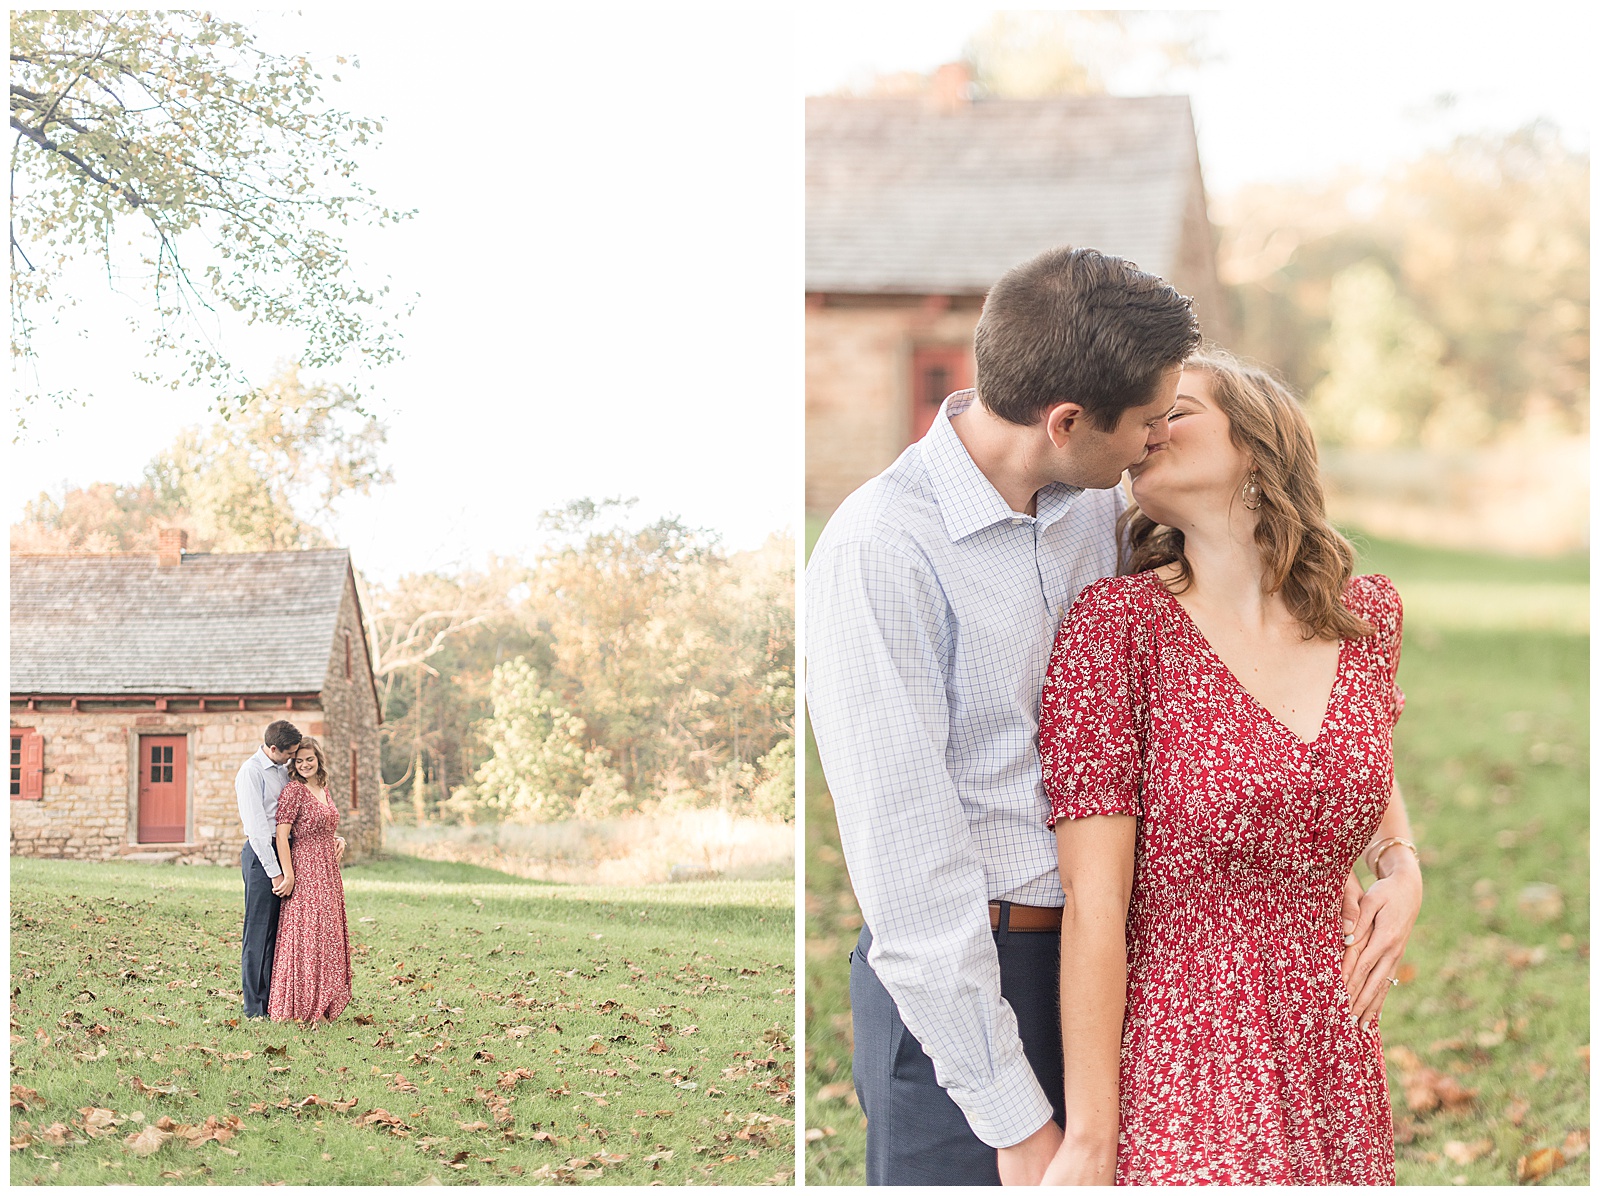 engaged couple standing close with guy slightly behind girl as they kiss on sunny fall evening with historical stone barn behind them